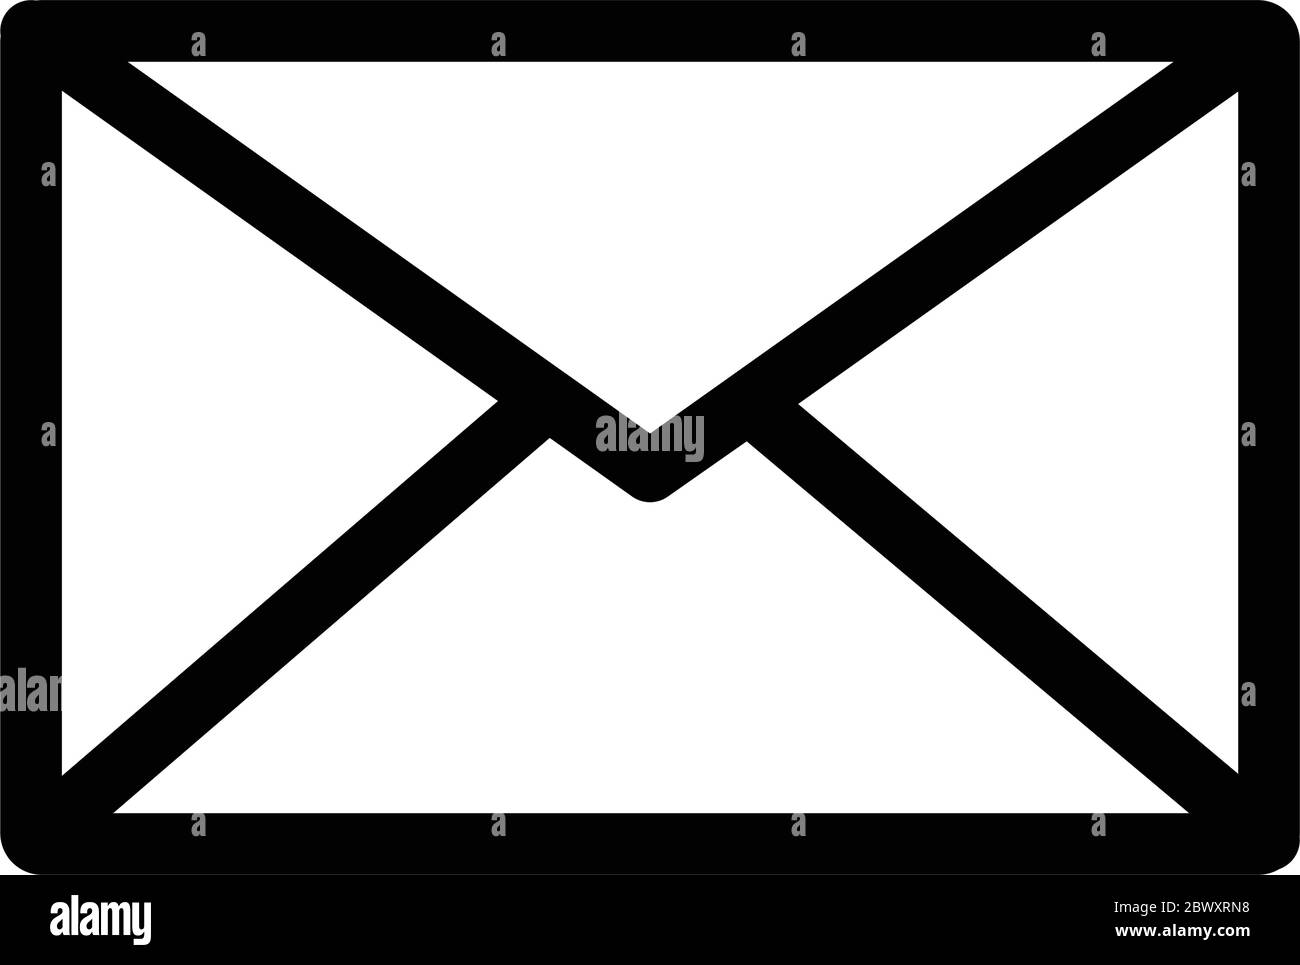 Email symbol Black and White Stock Photos & Images - Alamy